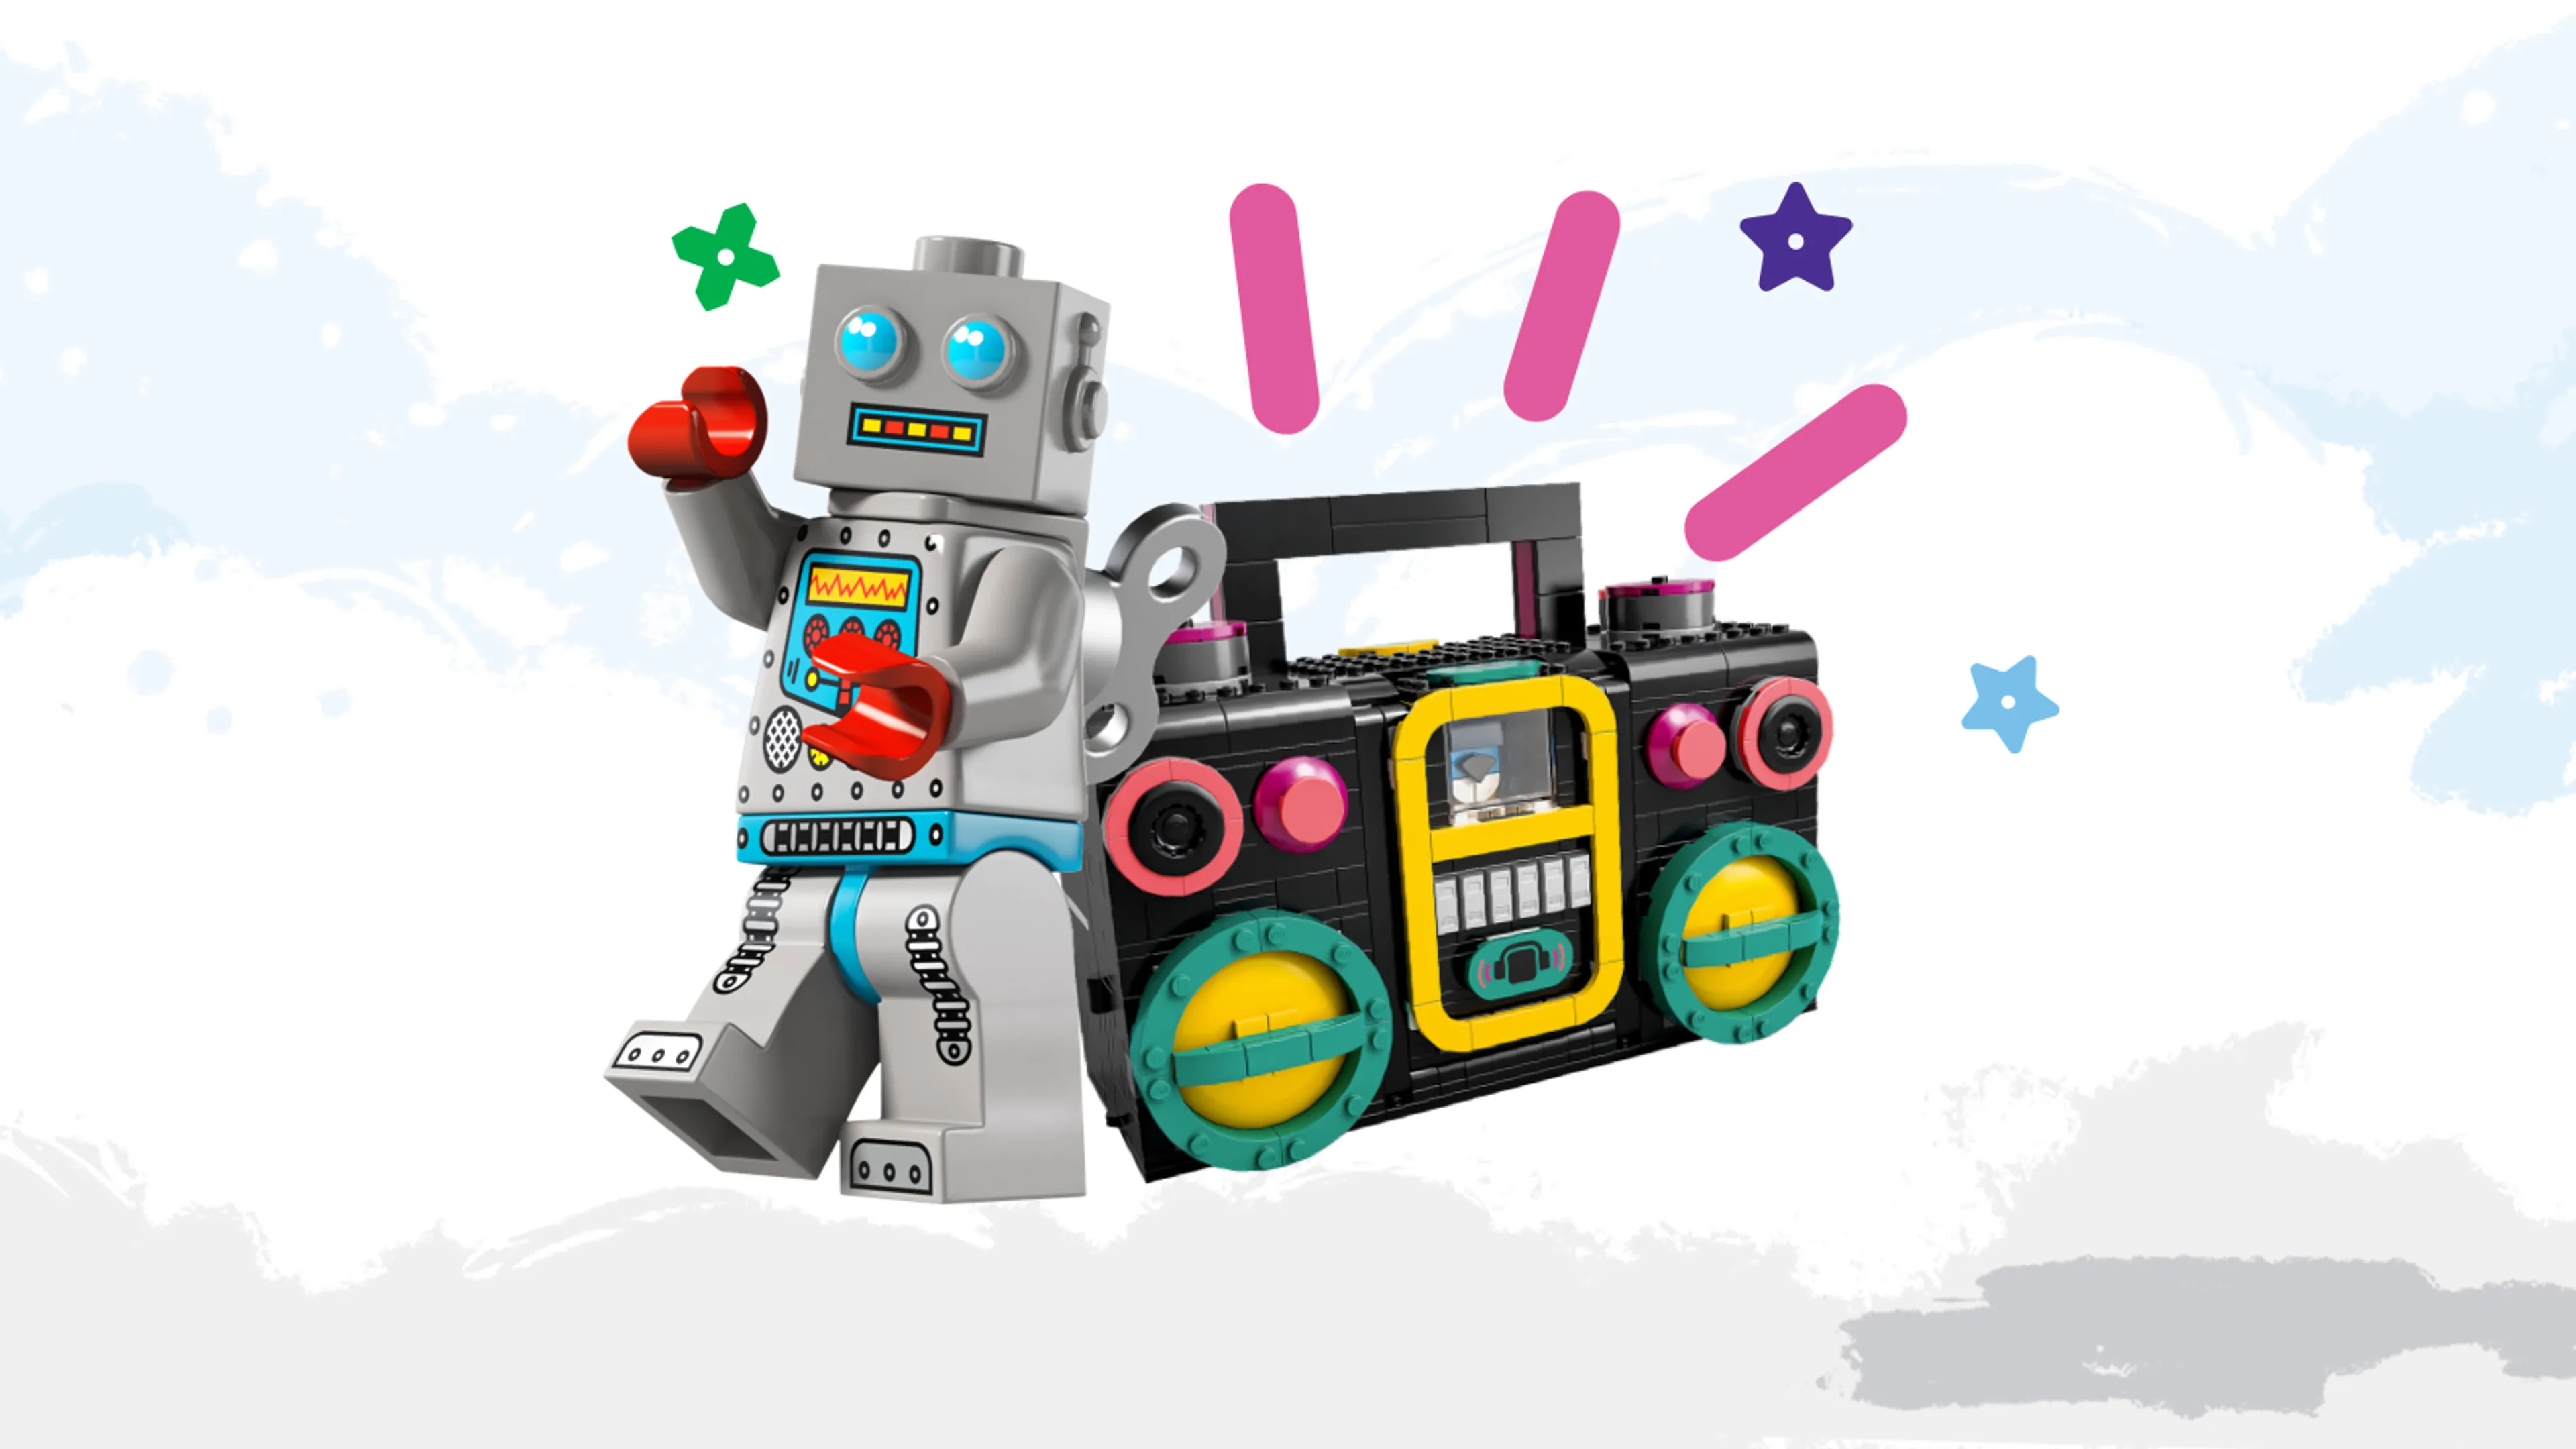 A robot minifigure and a LEGO boombox